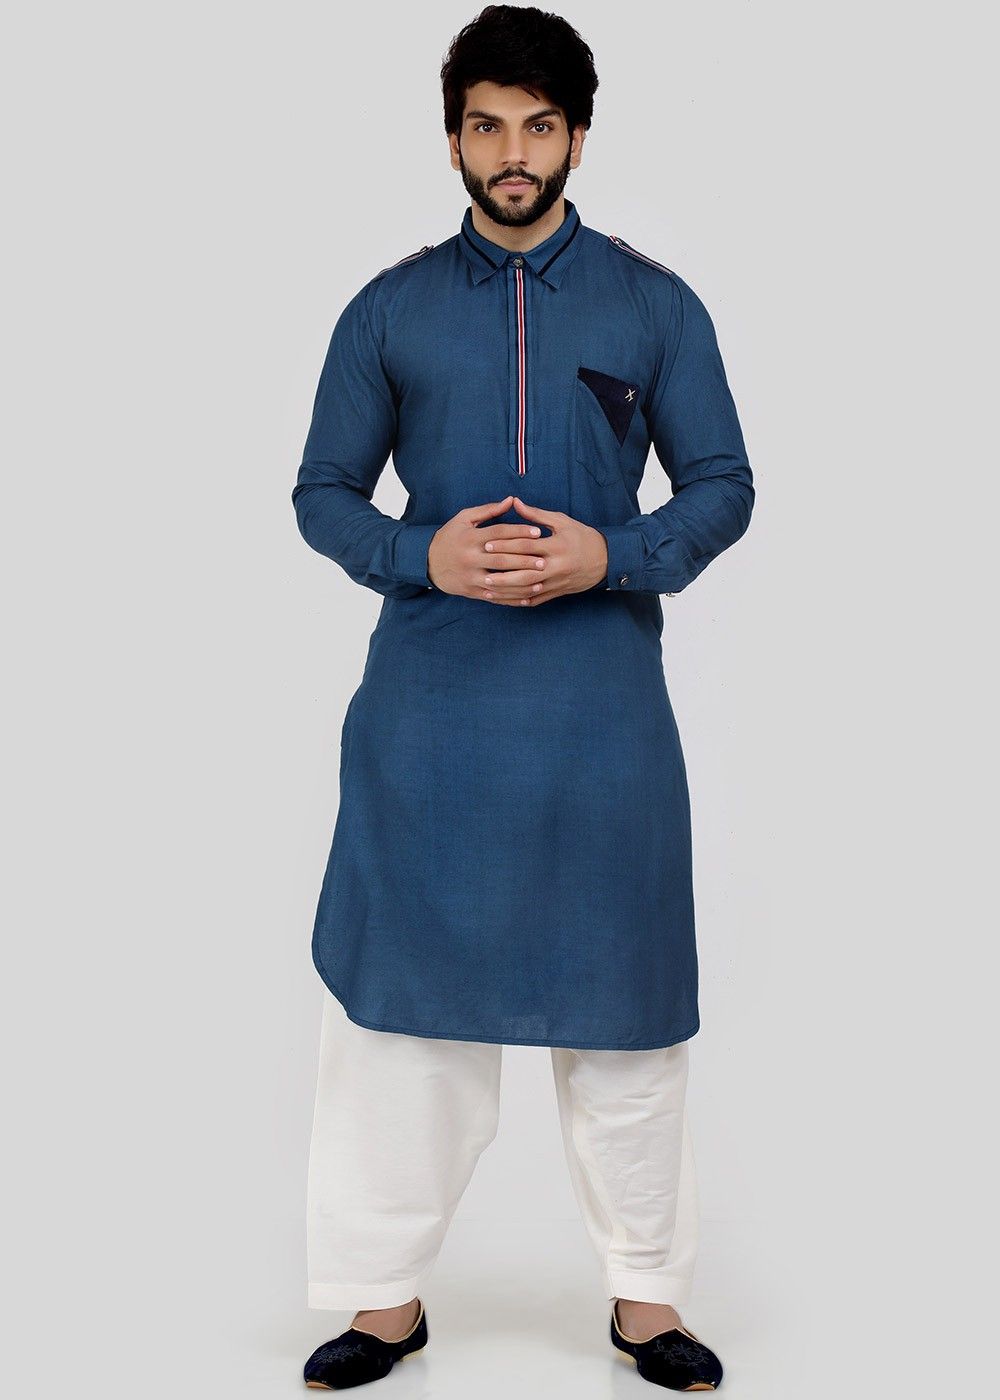 Traditional Pathani Suit For Men